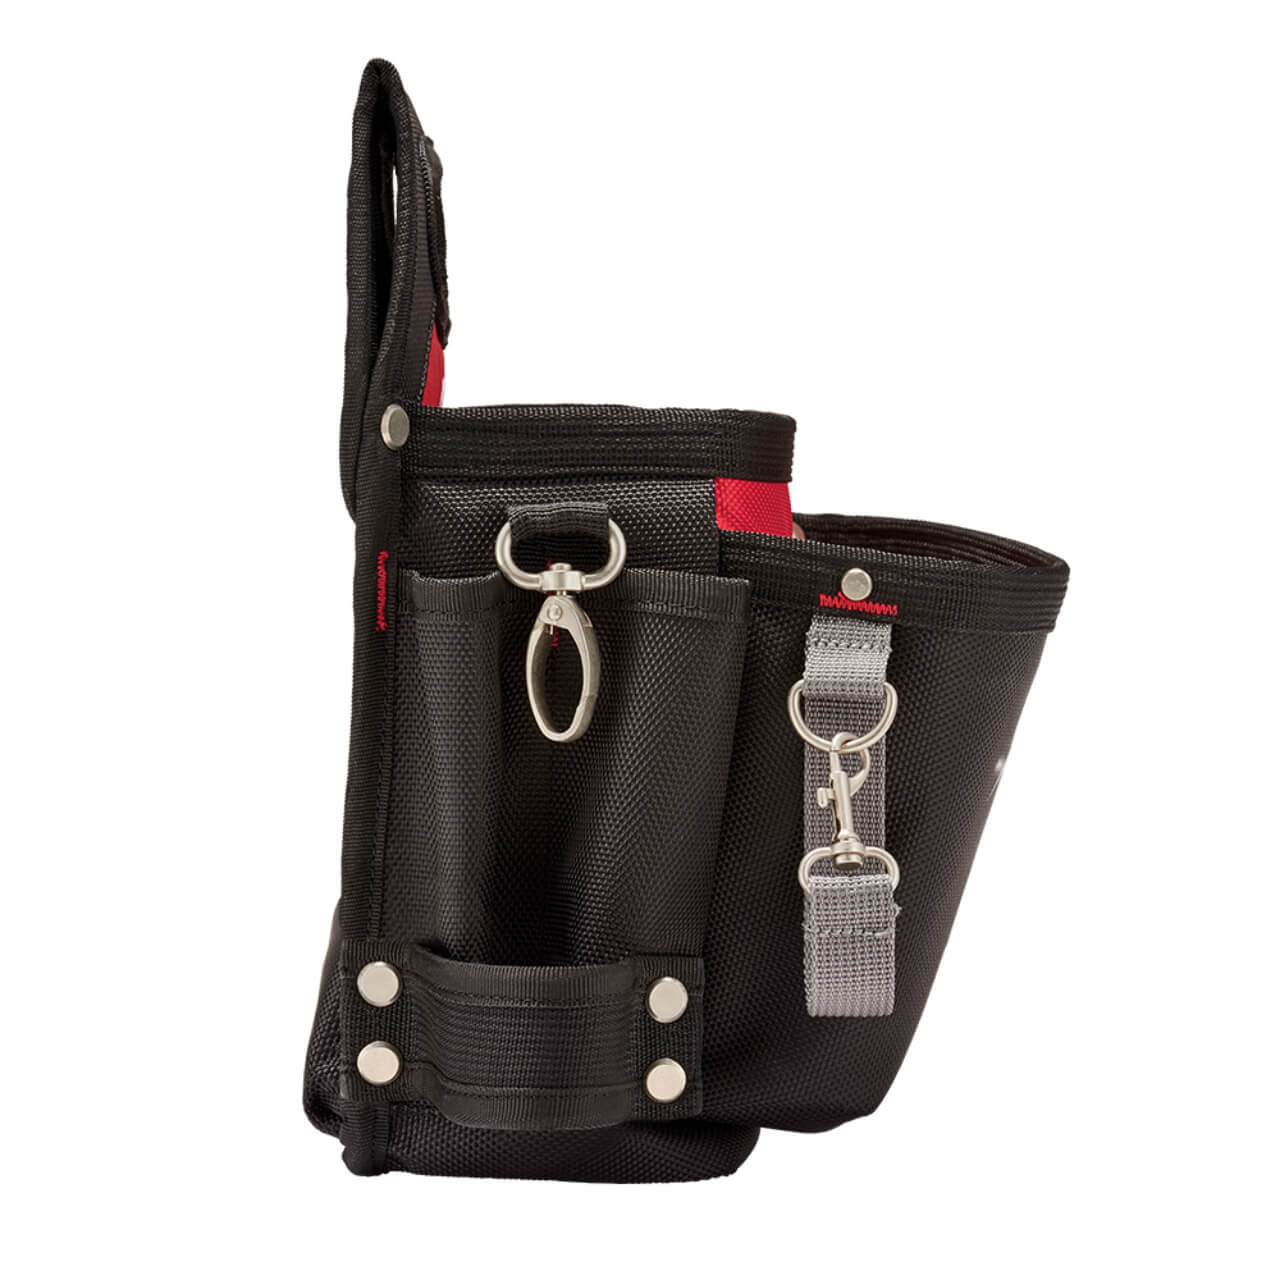 Milwaukee 15 Pocket Electricians Work Pouch With Quick Adjust Belt